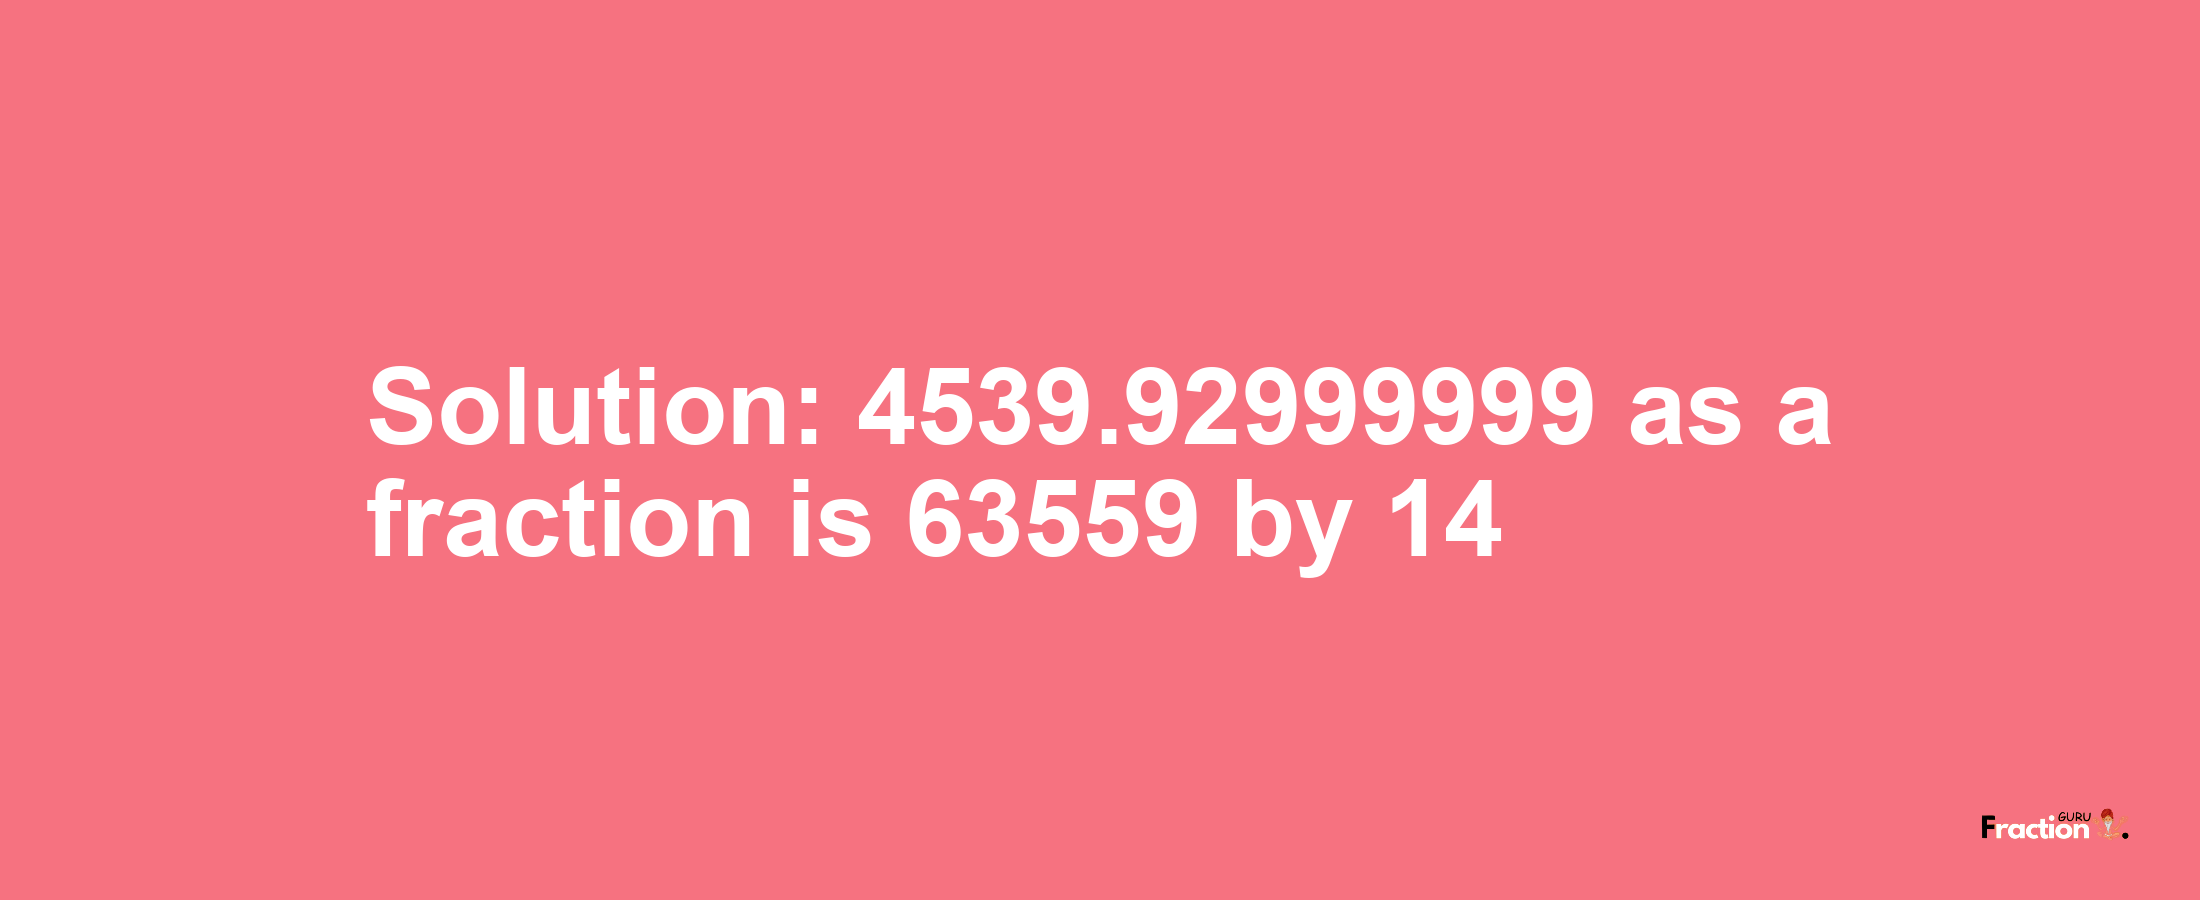 Solution:4539.92999999 as a fraction is 63559/14